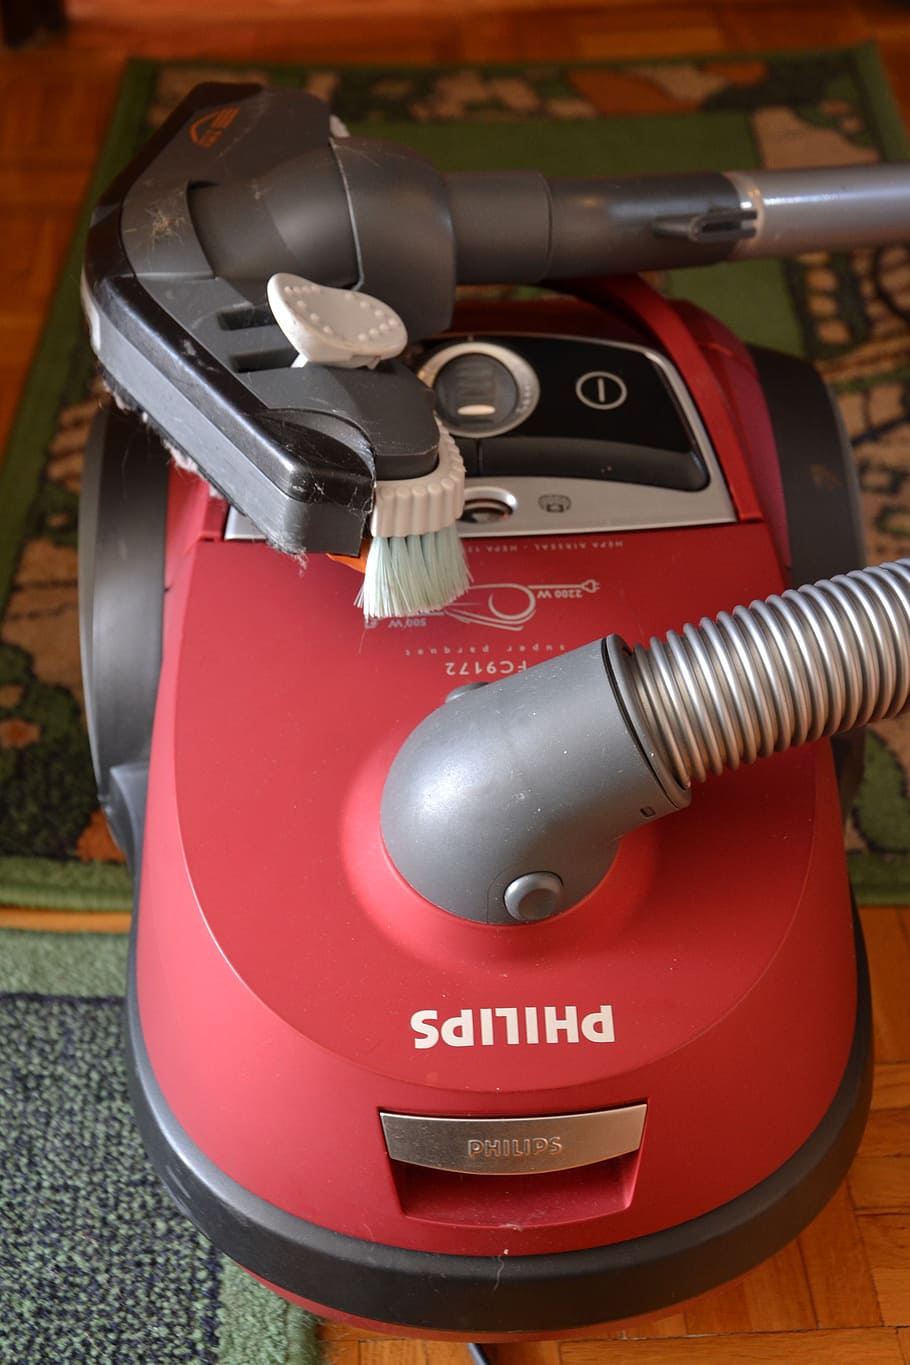 cleaning, clean up, the order of the, cleanup, vacuum cleaner, vacuuming, carpet, carpeting, clean, close-up